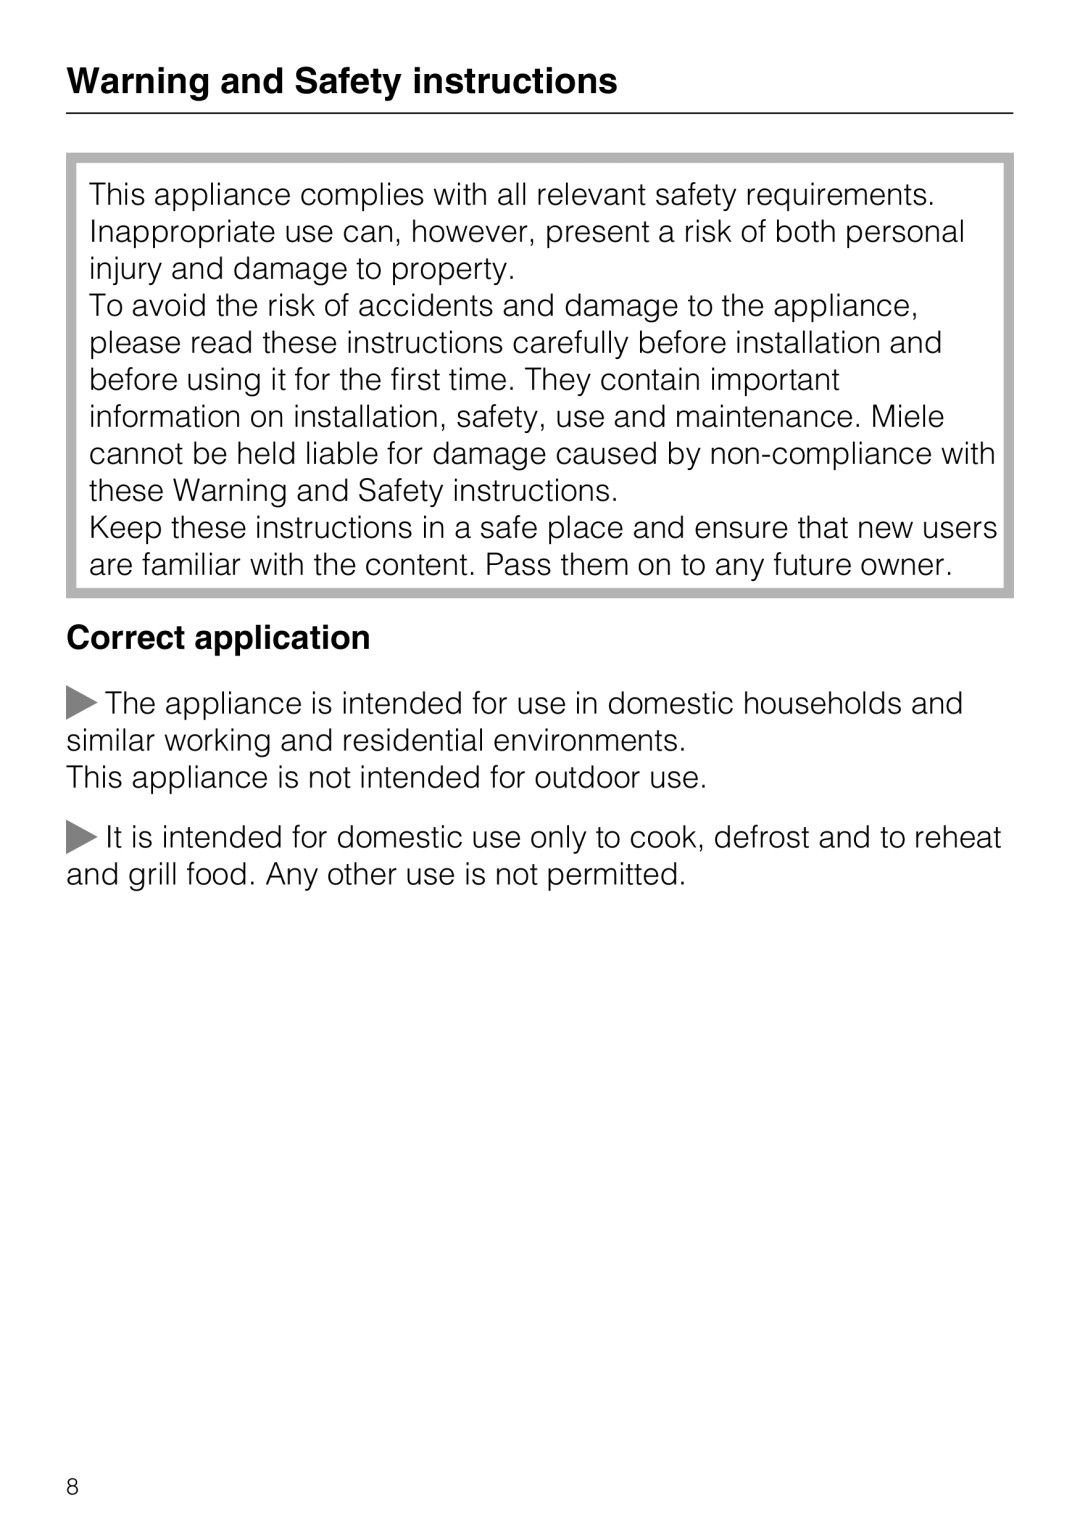 Miele 09 919 100 operating instructions Warning and Safety instructions, Correct application 